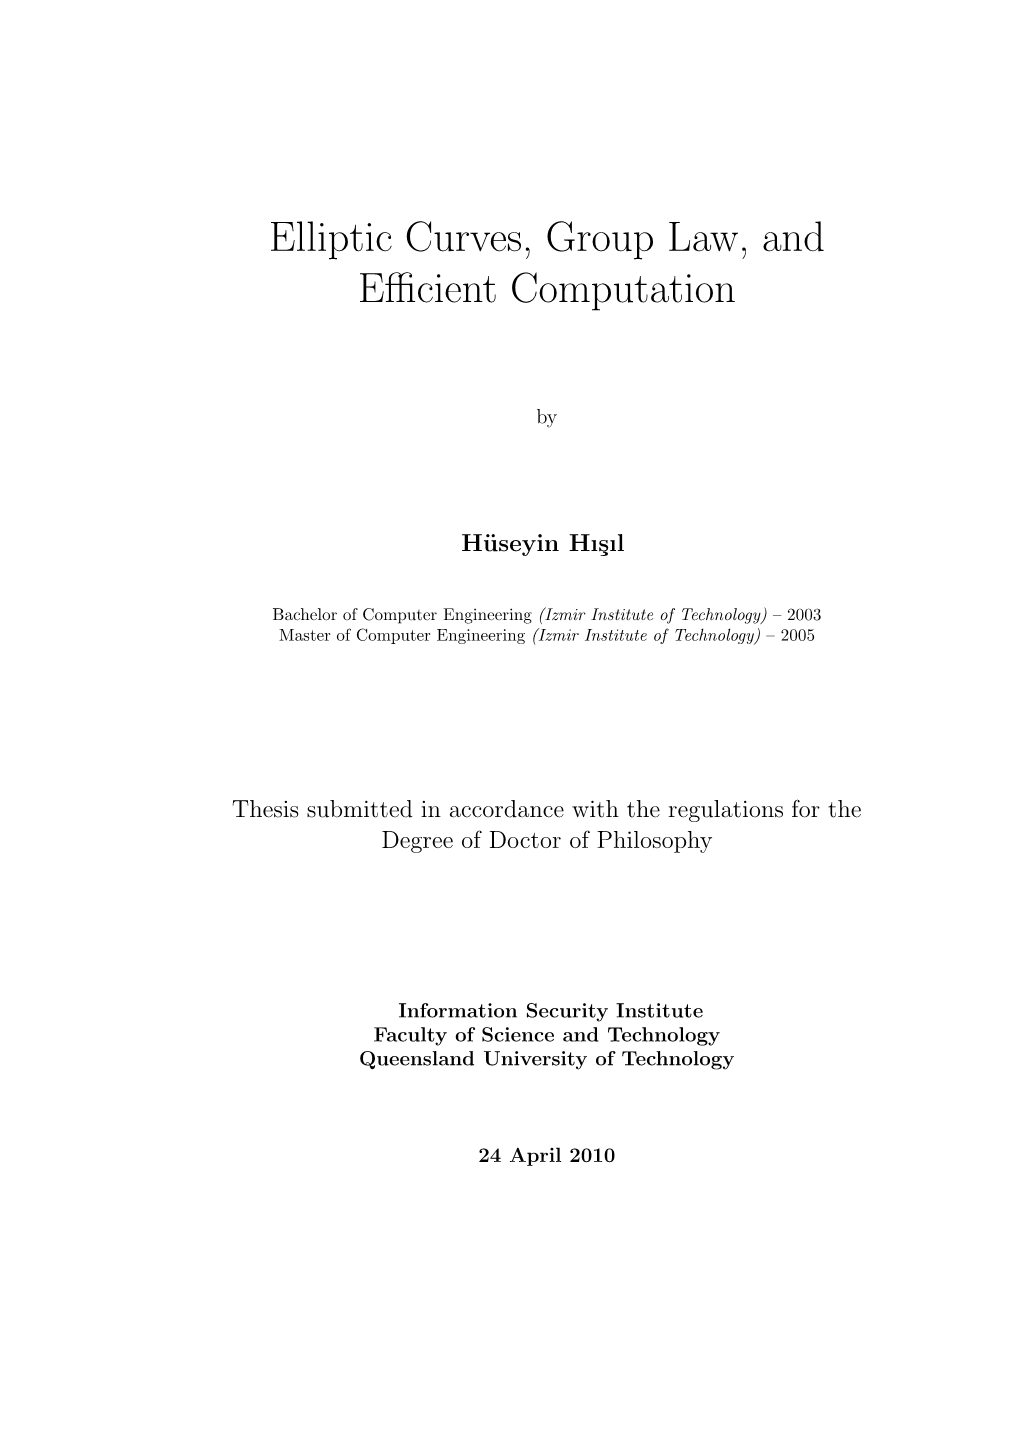 Elliptic Curves, Group Law, and Efficient Computation